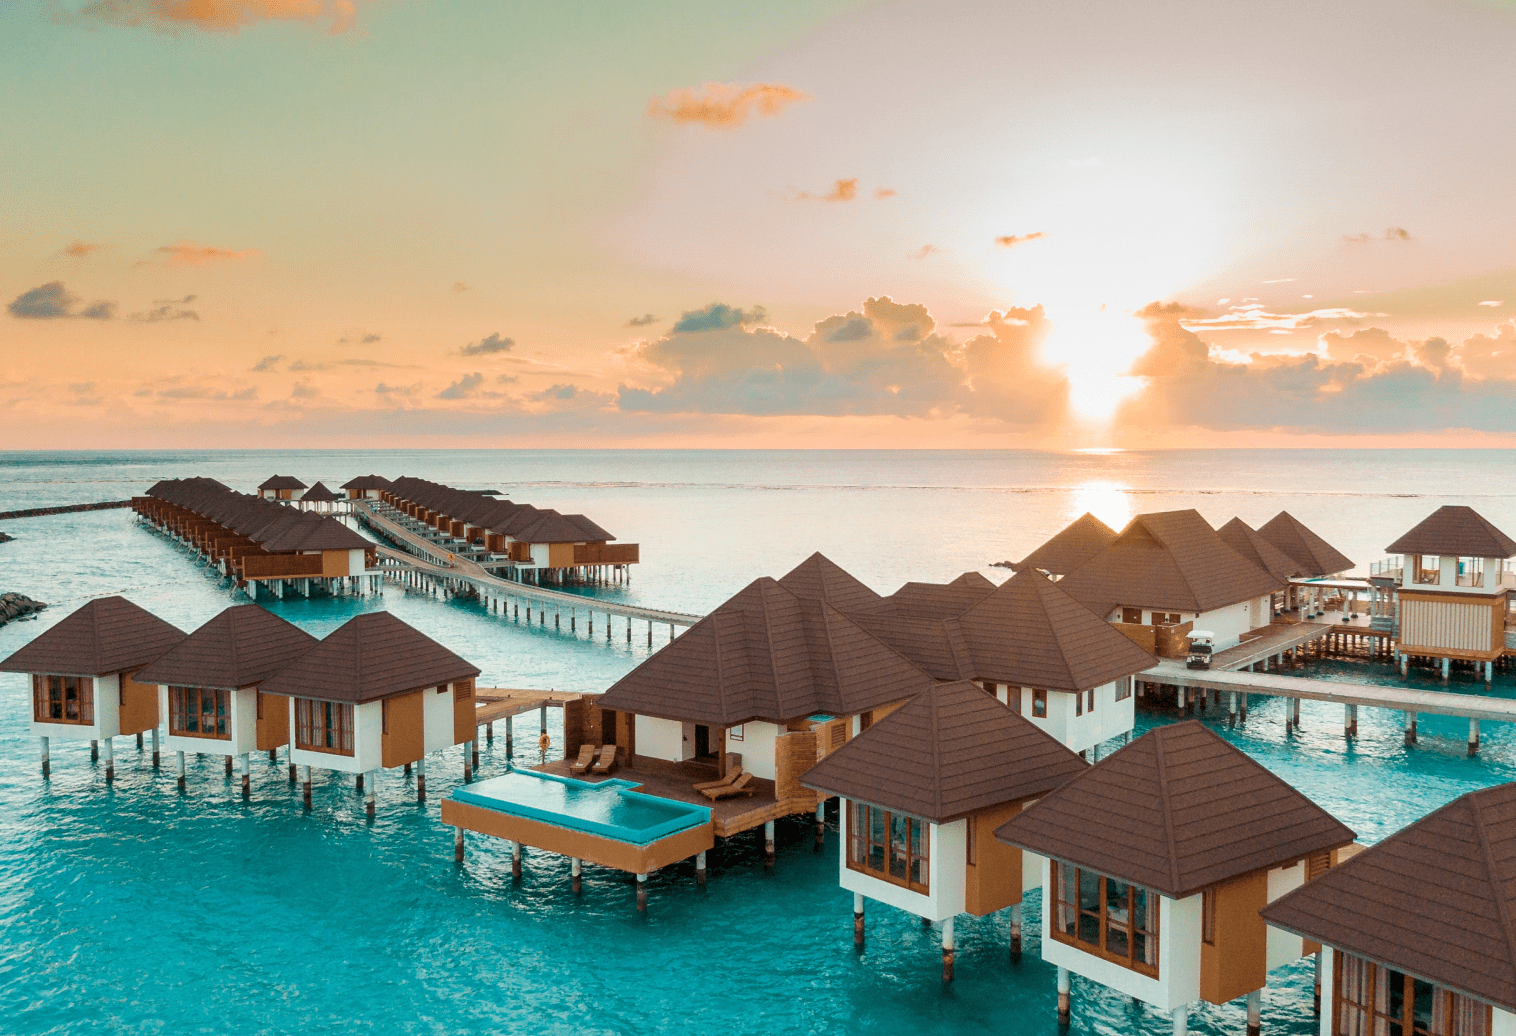 The Best Areas to Stay in the Maldives